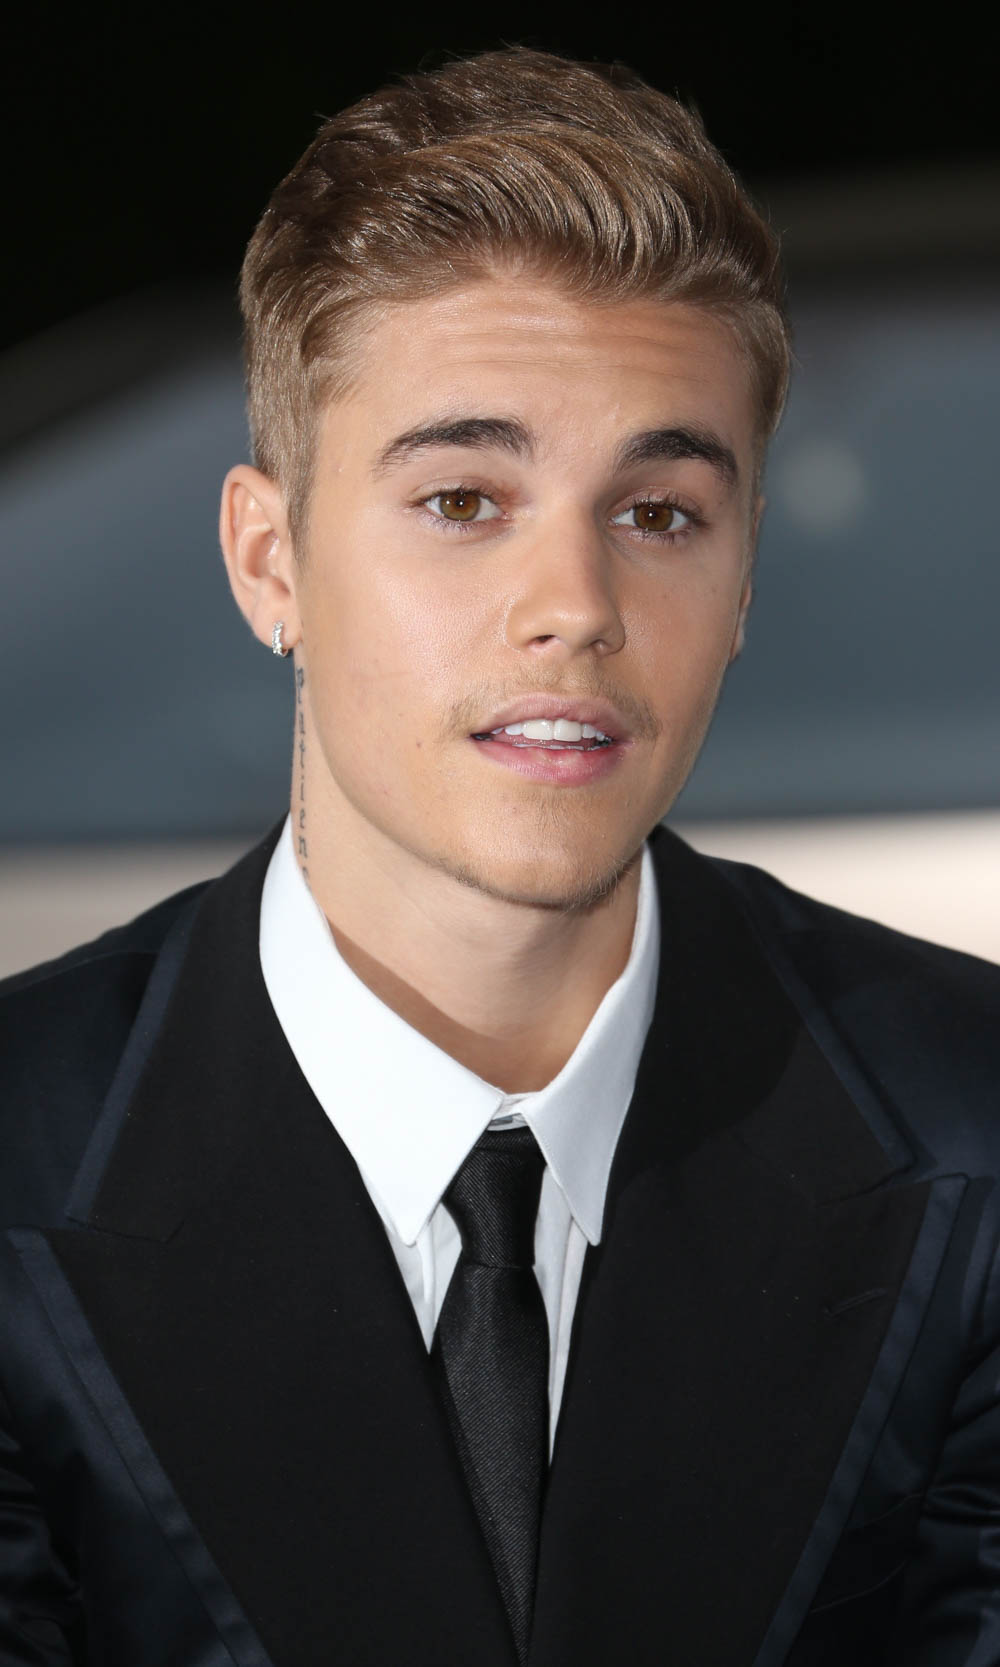 25 Iconic Justin Bieber Hairstyles Of All Time | Fabbon-hkpdtq2012.edu.vn